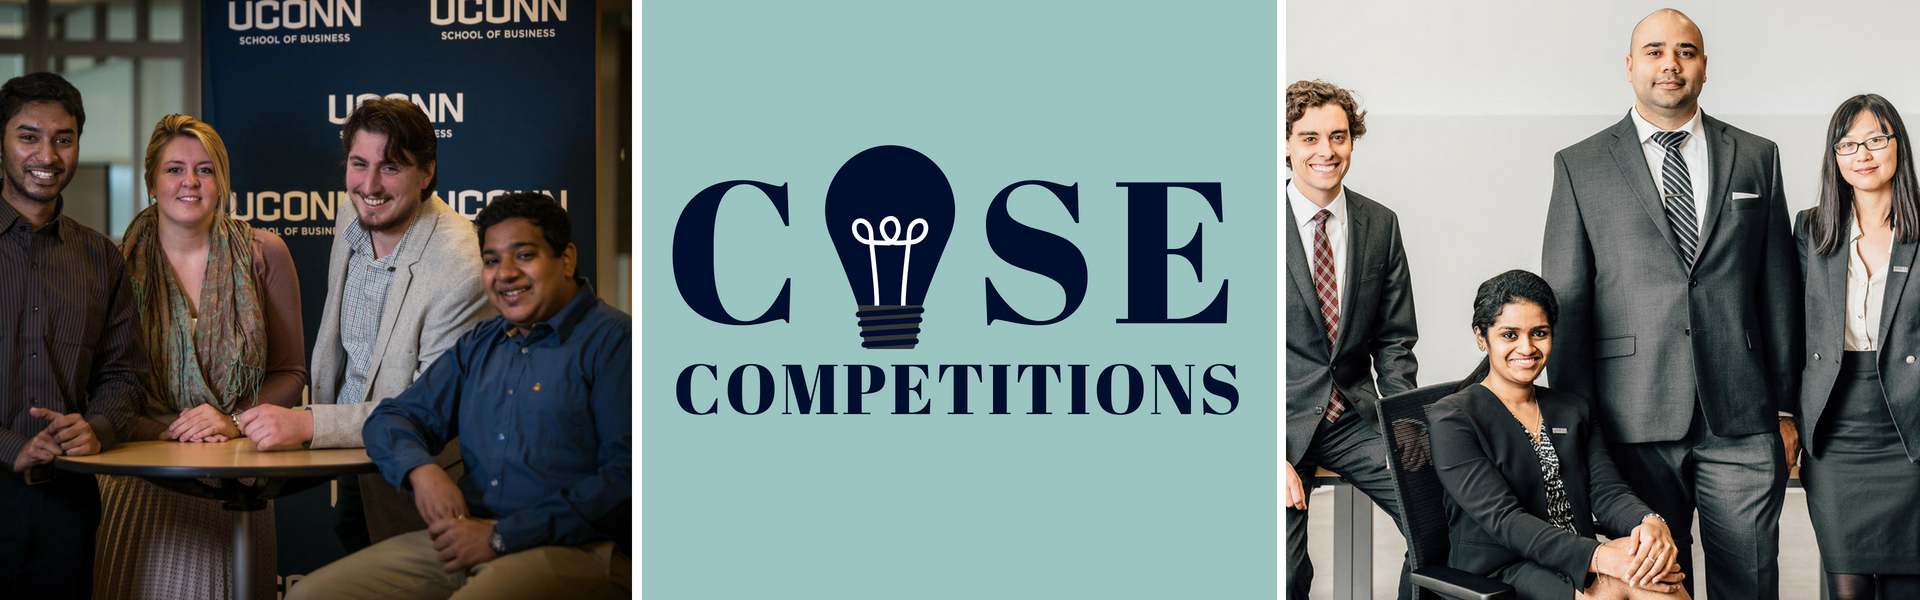 UConn School of Business Case Competitions